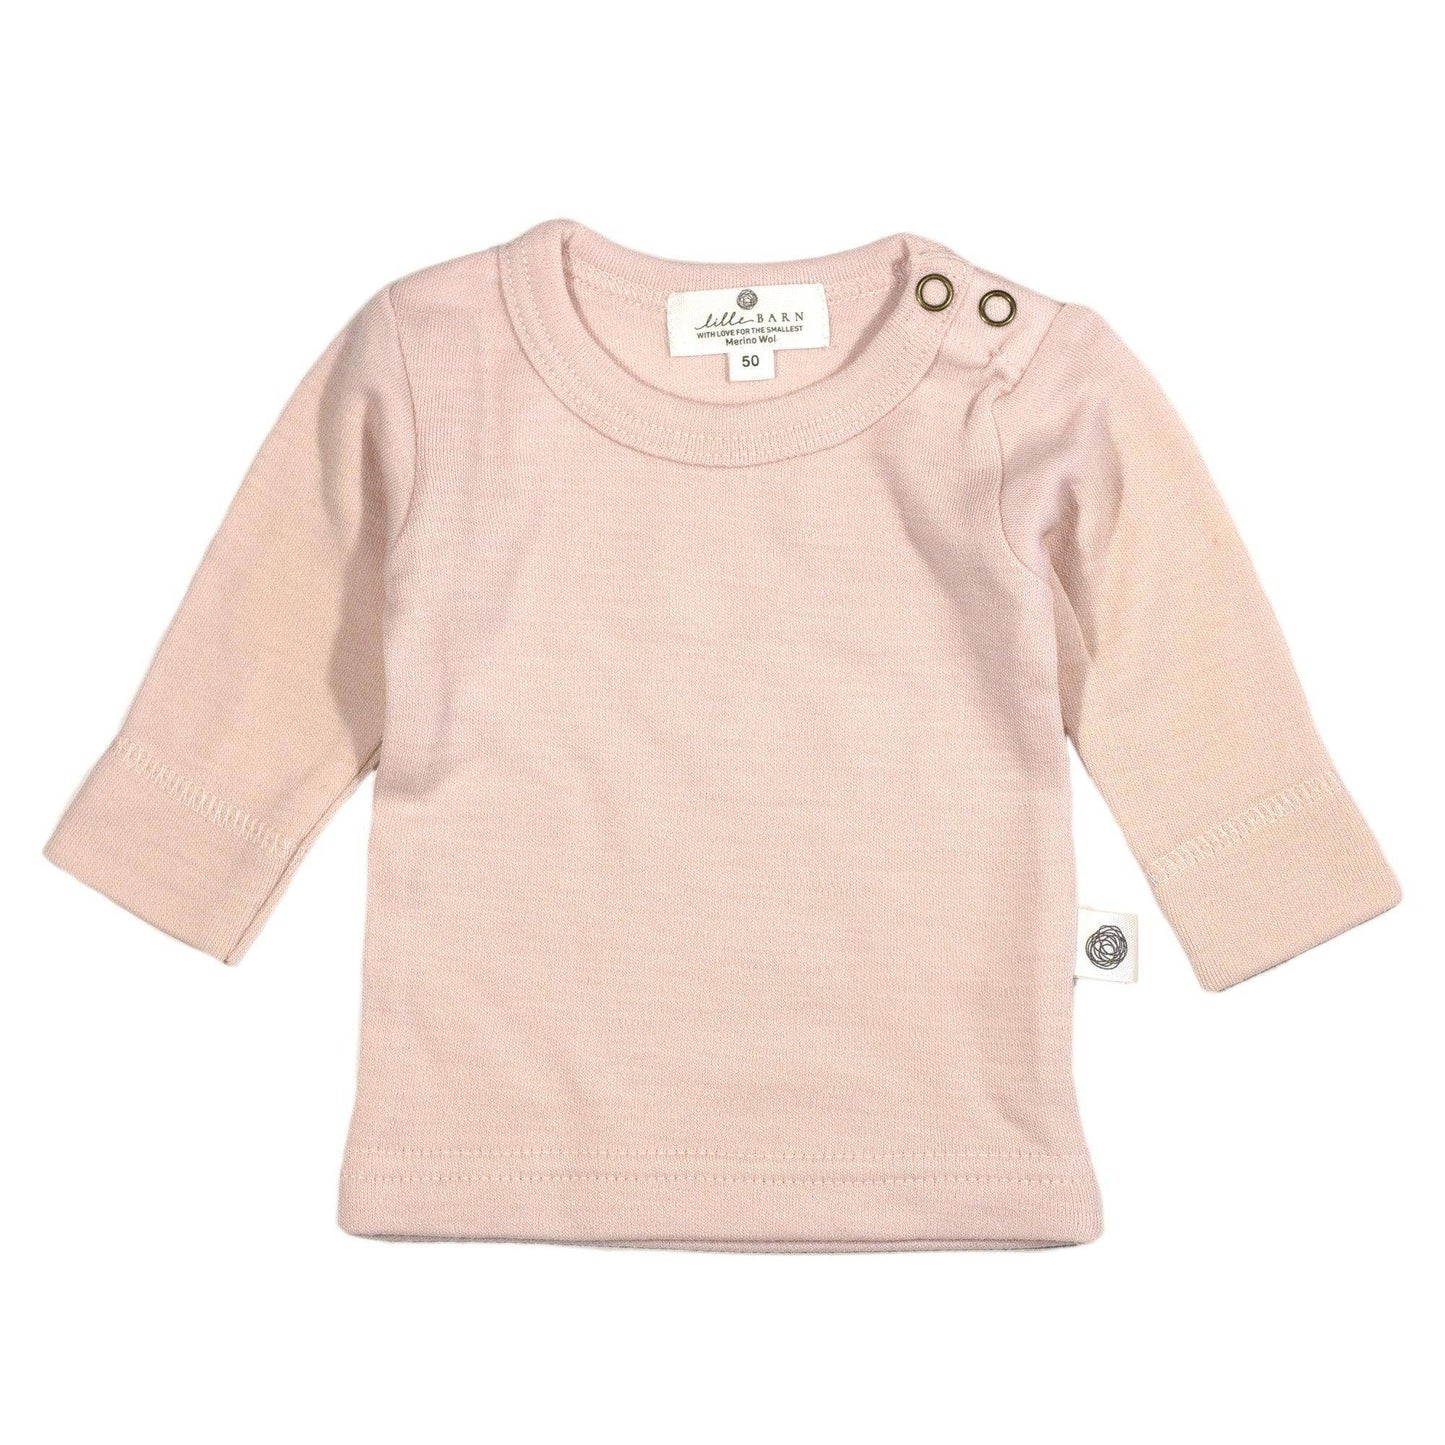 Wollen Baby trui / long sleeve shirt – merinowol - Sepia rose - Lille Barn - With ♥ for the smallest